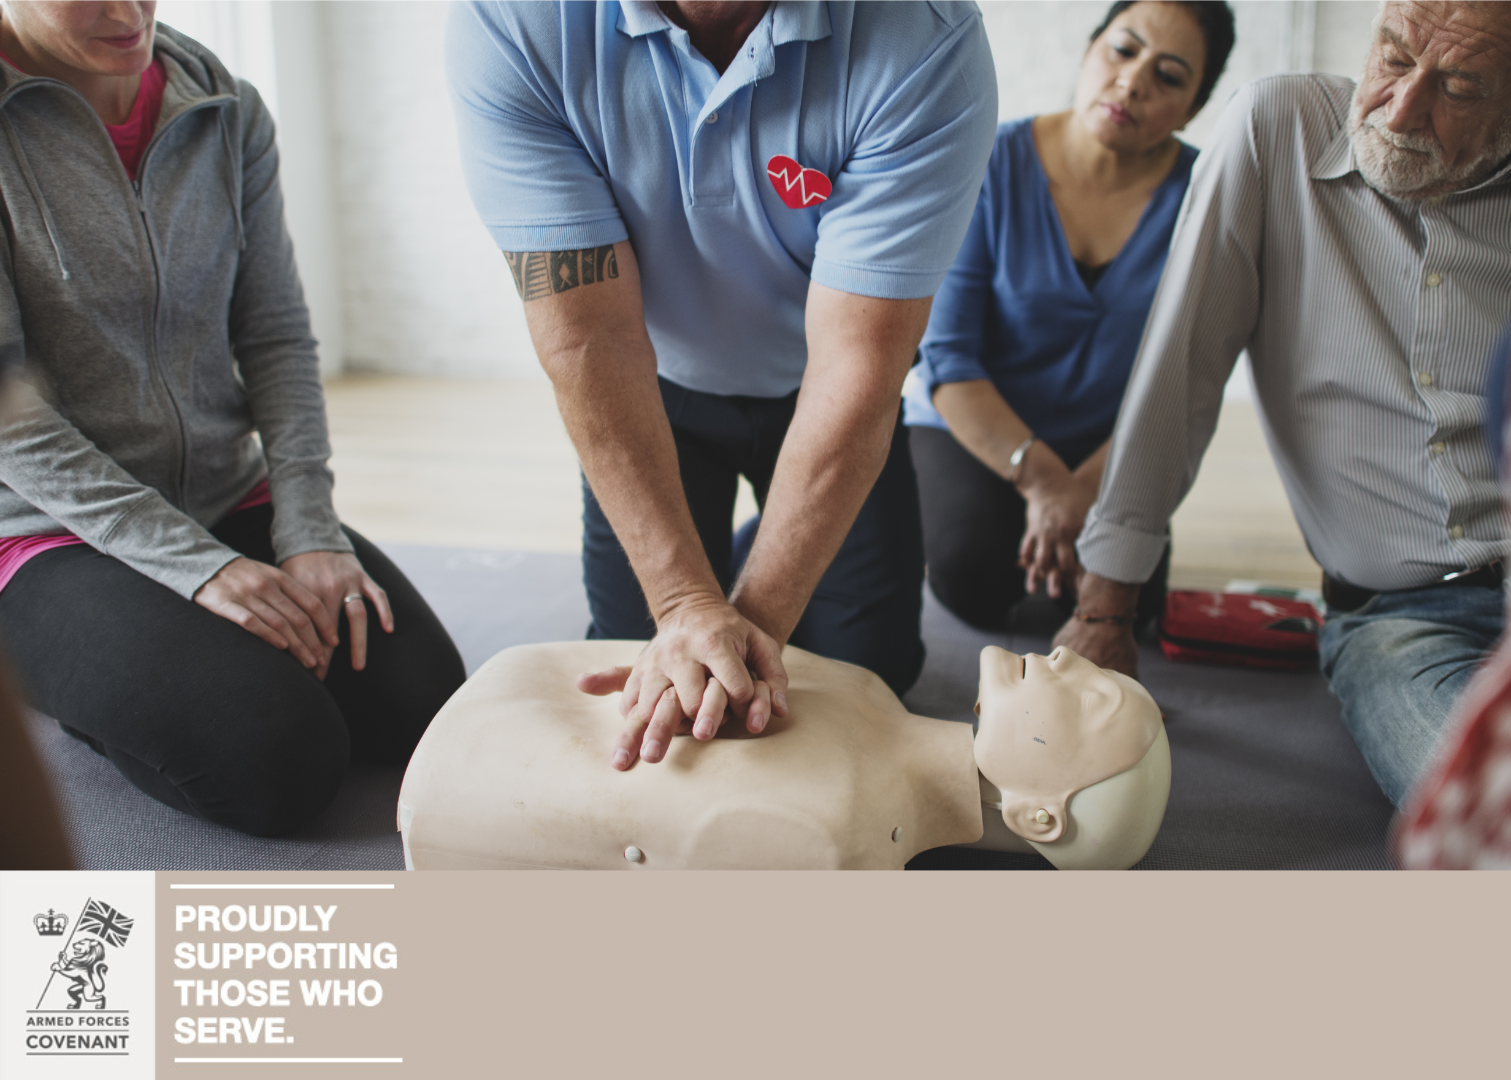 First aid training - CPR